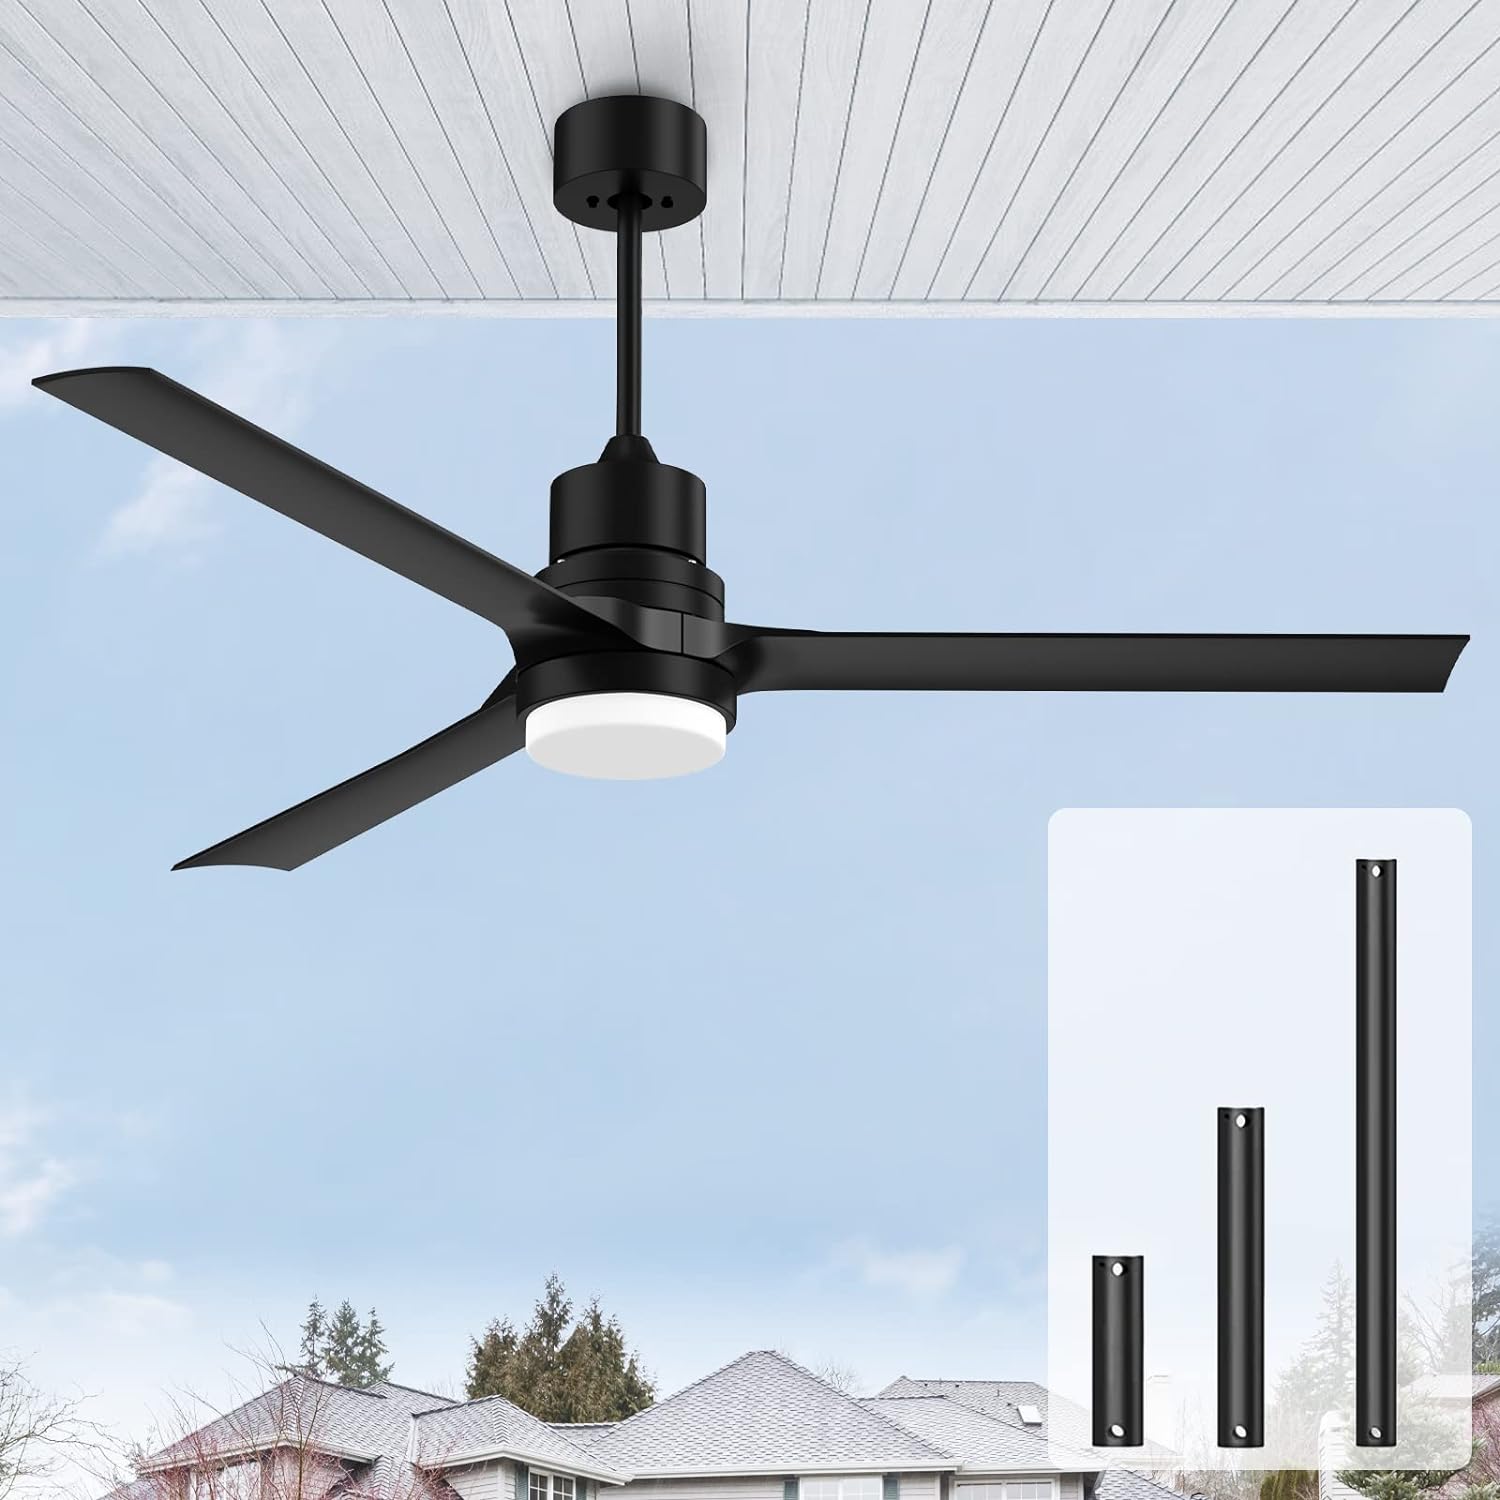 Black 60-inch Modern Ceiling Fans with Lights,Remote Control Reversible DC Motor for Indoor and Outdoor,Patio Bedroom Living Room